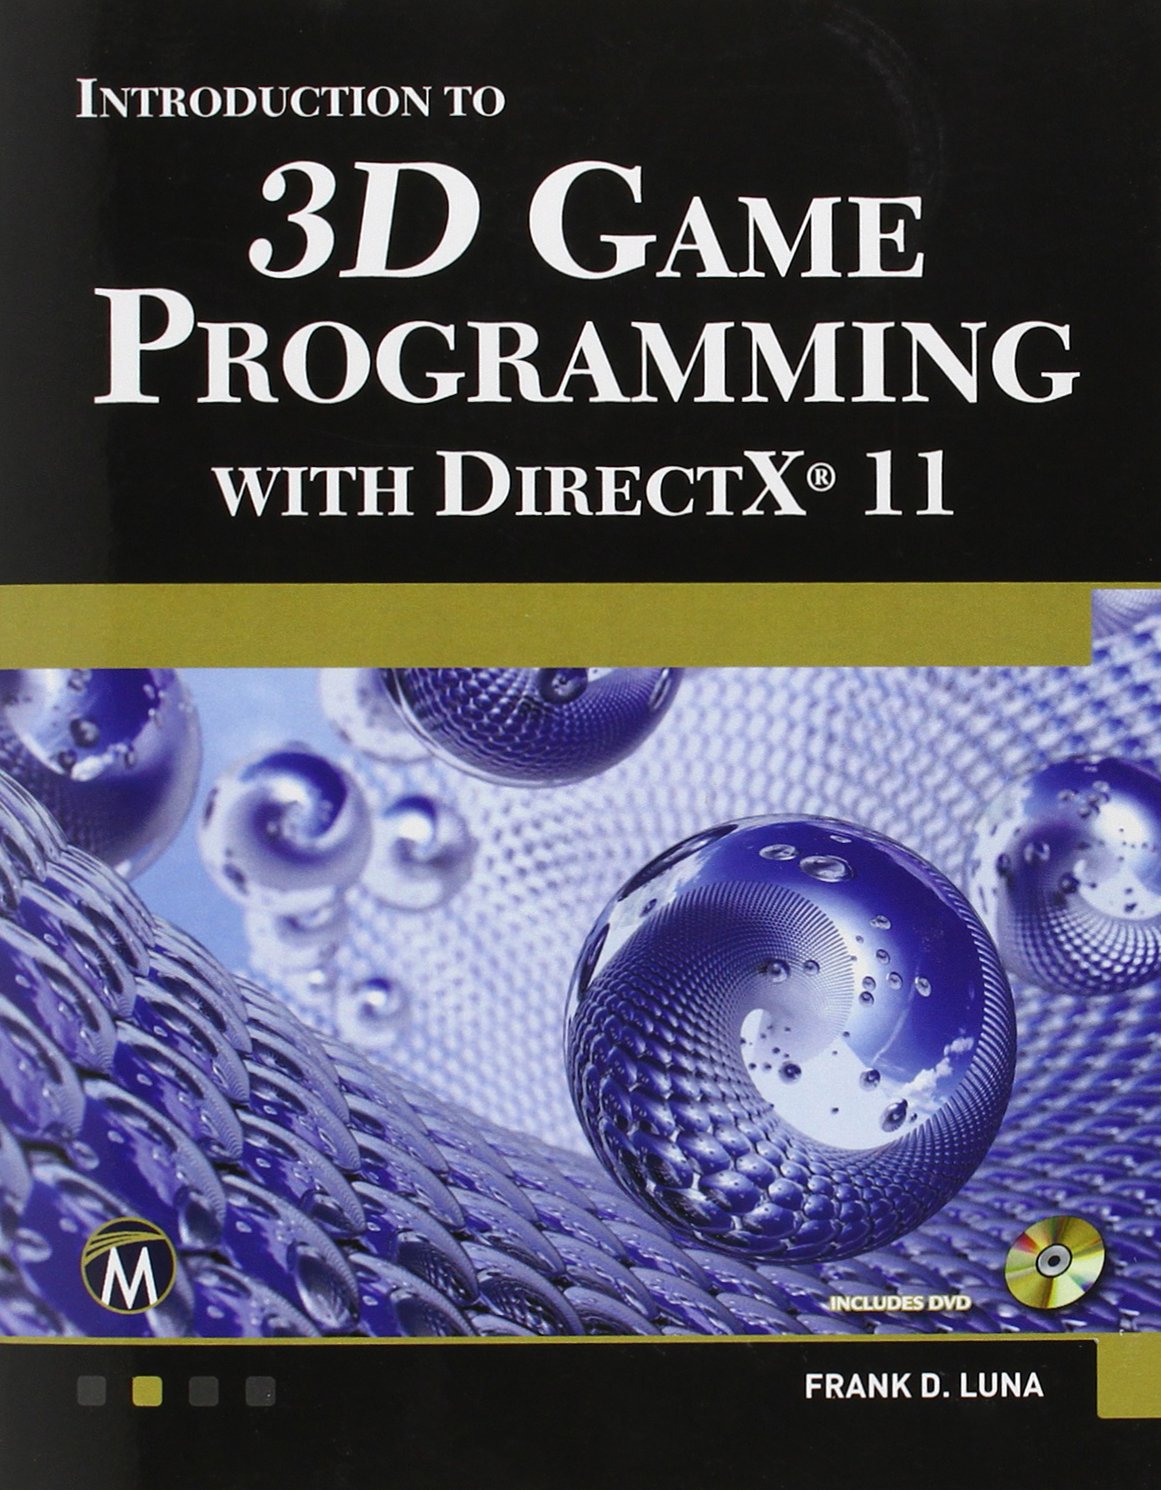 couverture du livre Introduction to 3D Game Programming with DirectX 11